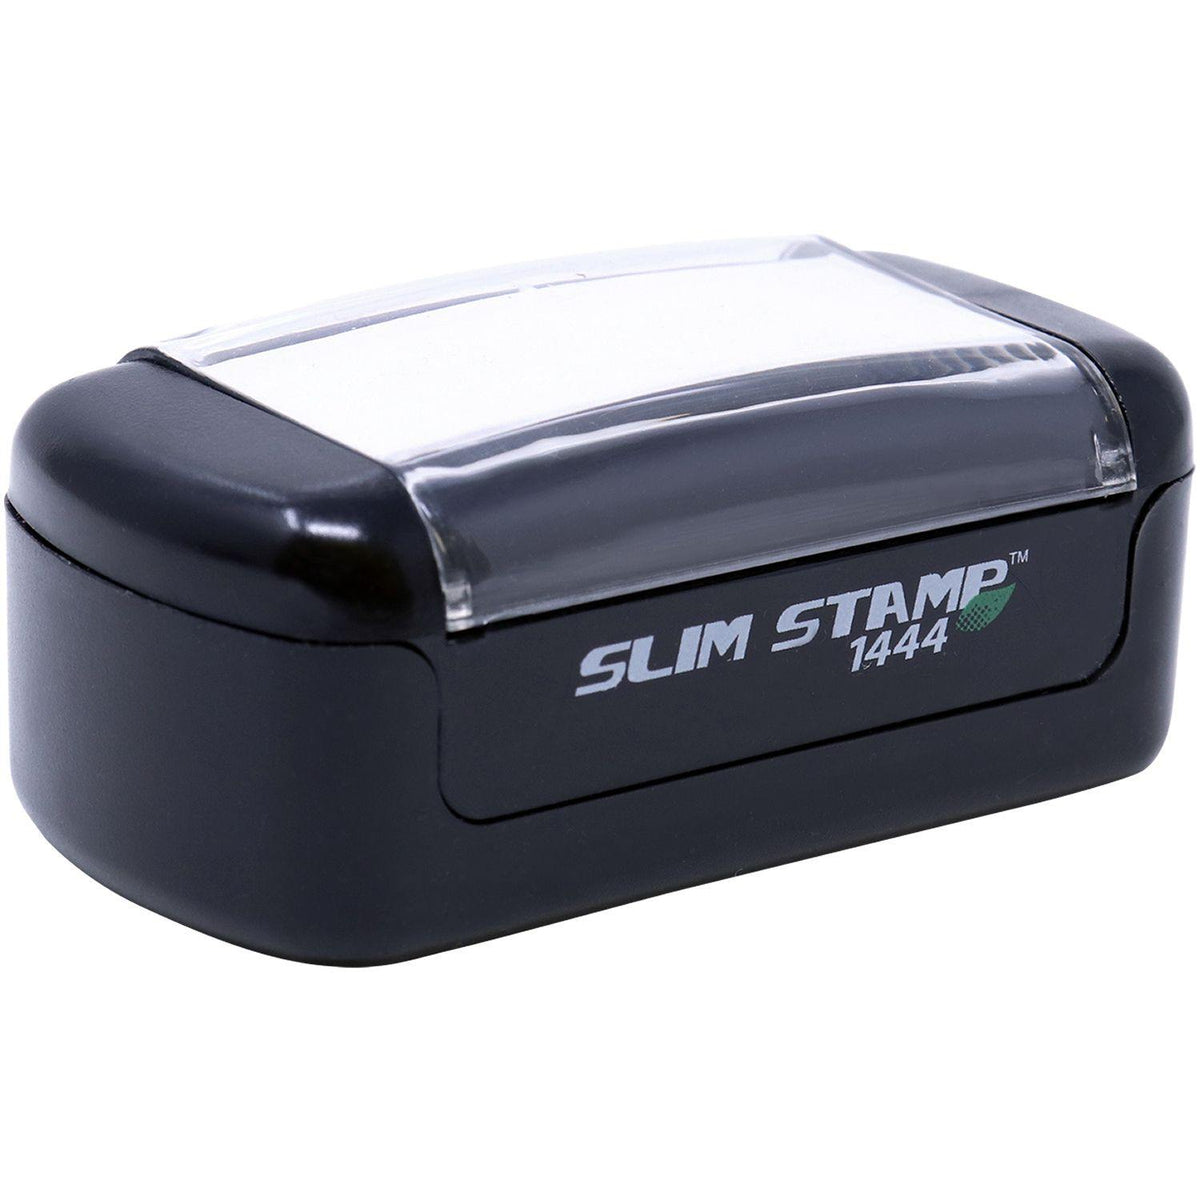 Alt View of Slim Pre-Inked Economy Rate Stamp Mount Angle